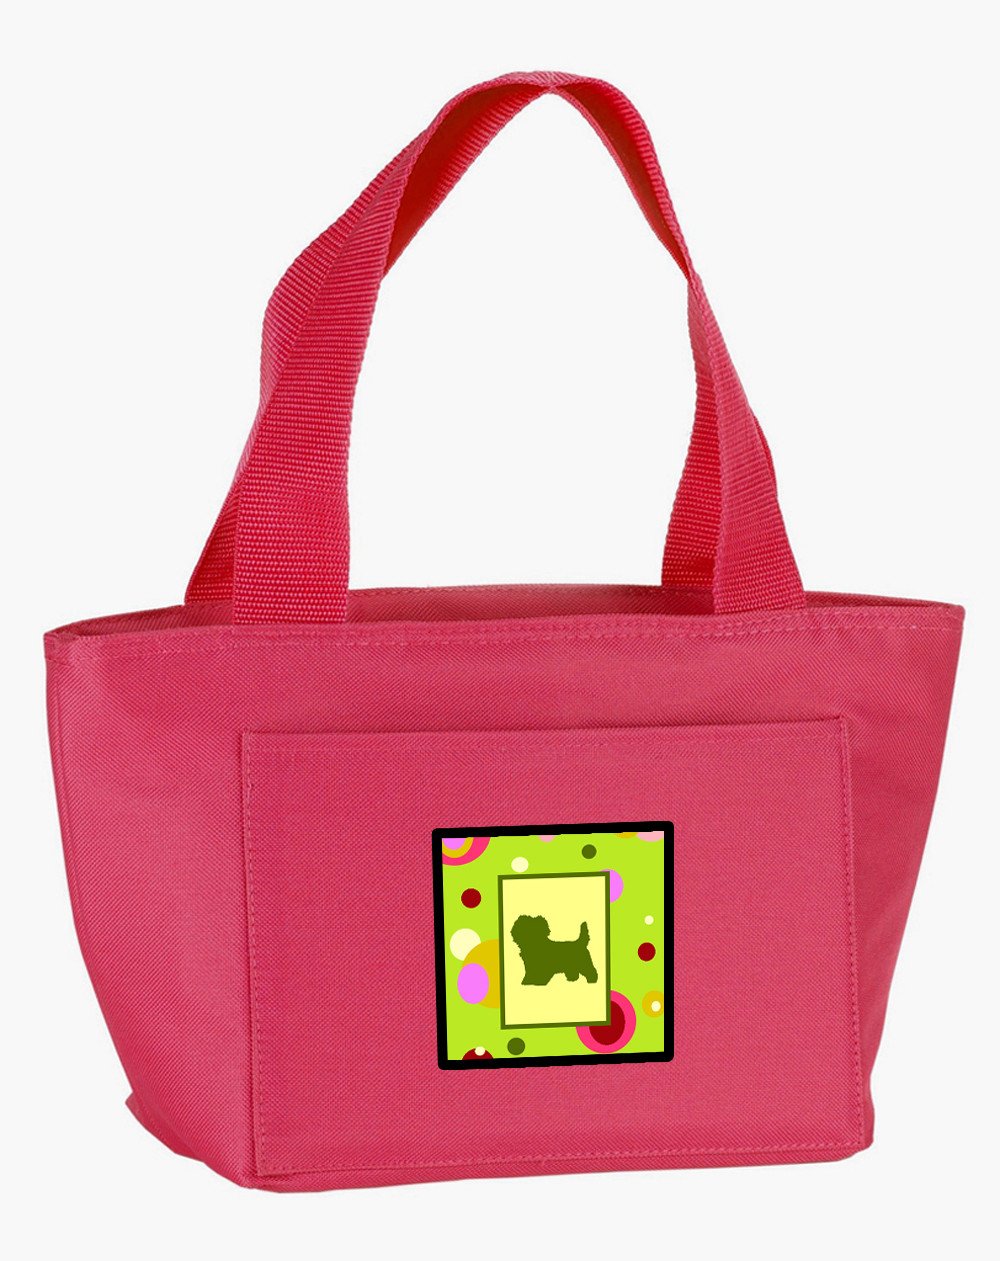 Lime Green Dots Cairn Terrier Lunch Bag CK1019PK-8808 by Caroline's Treasures